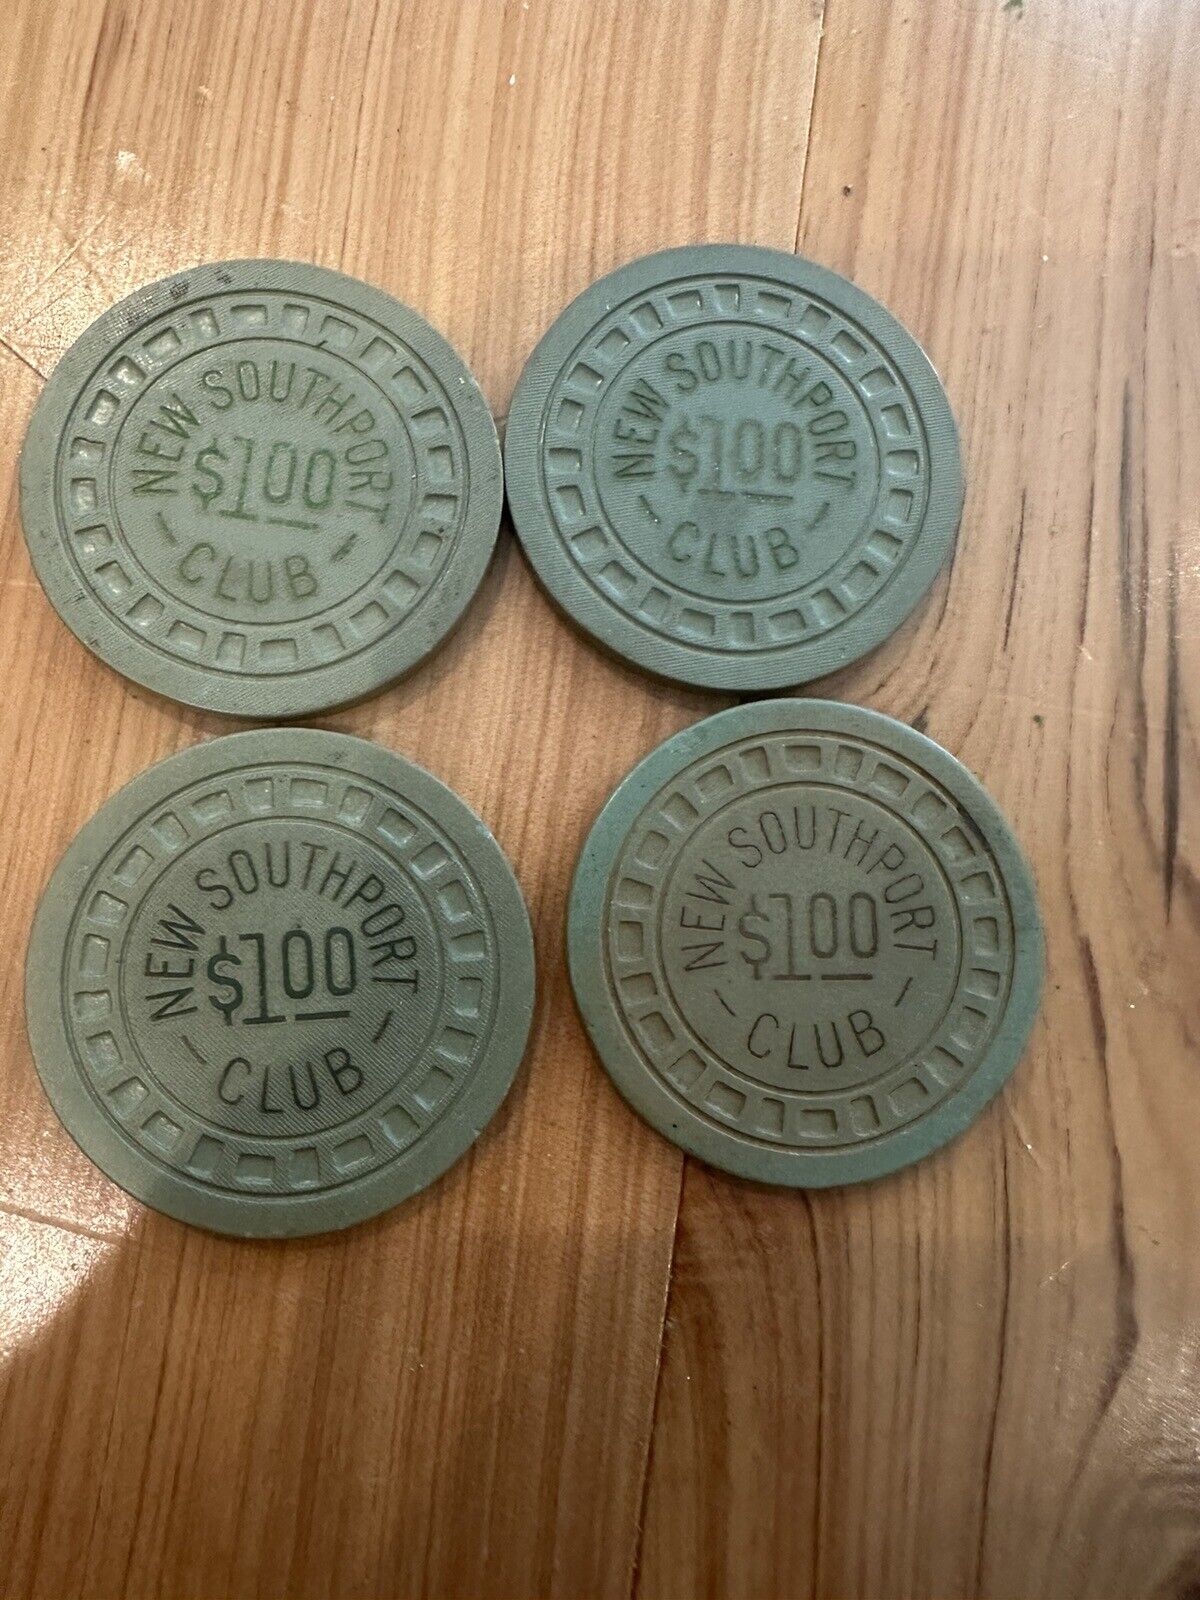 Vintage Illegal Gambling Chips New Orleans New Southport Club Lot Of Four 4